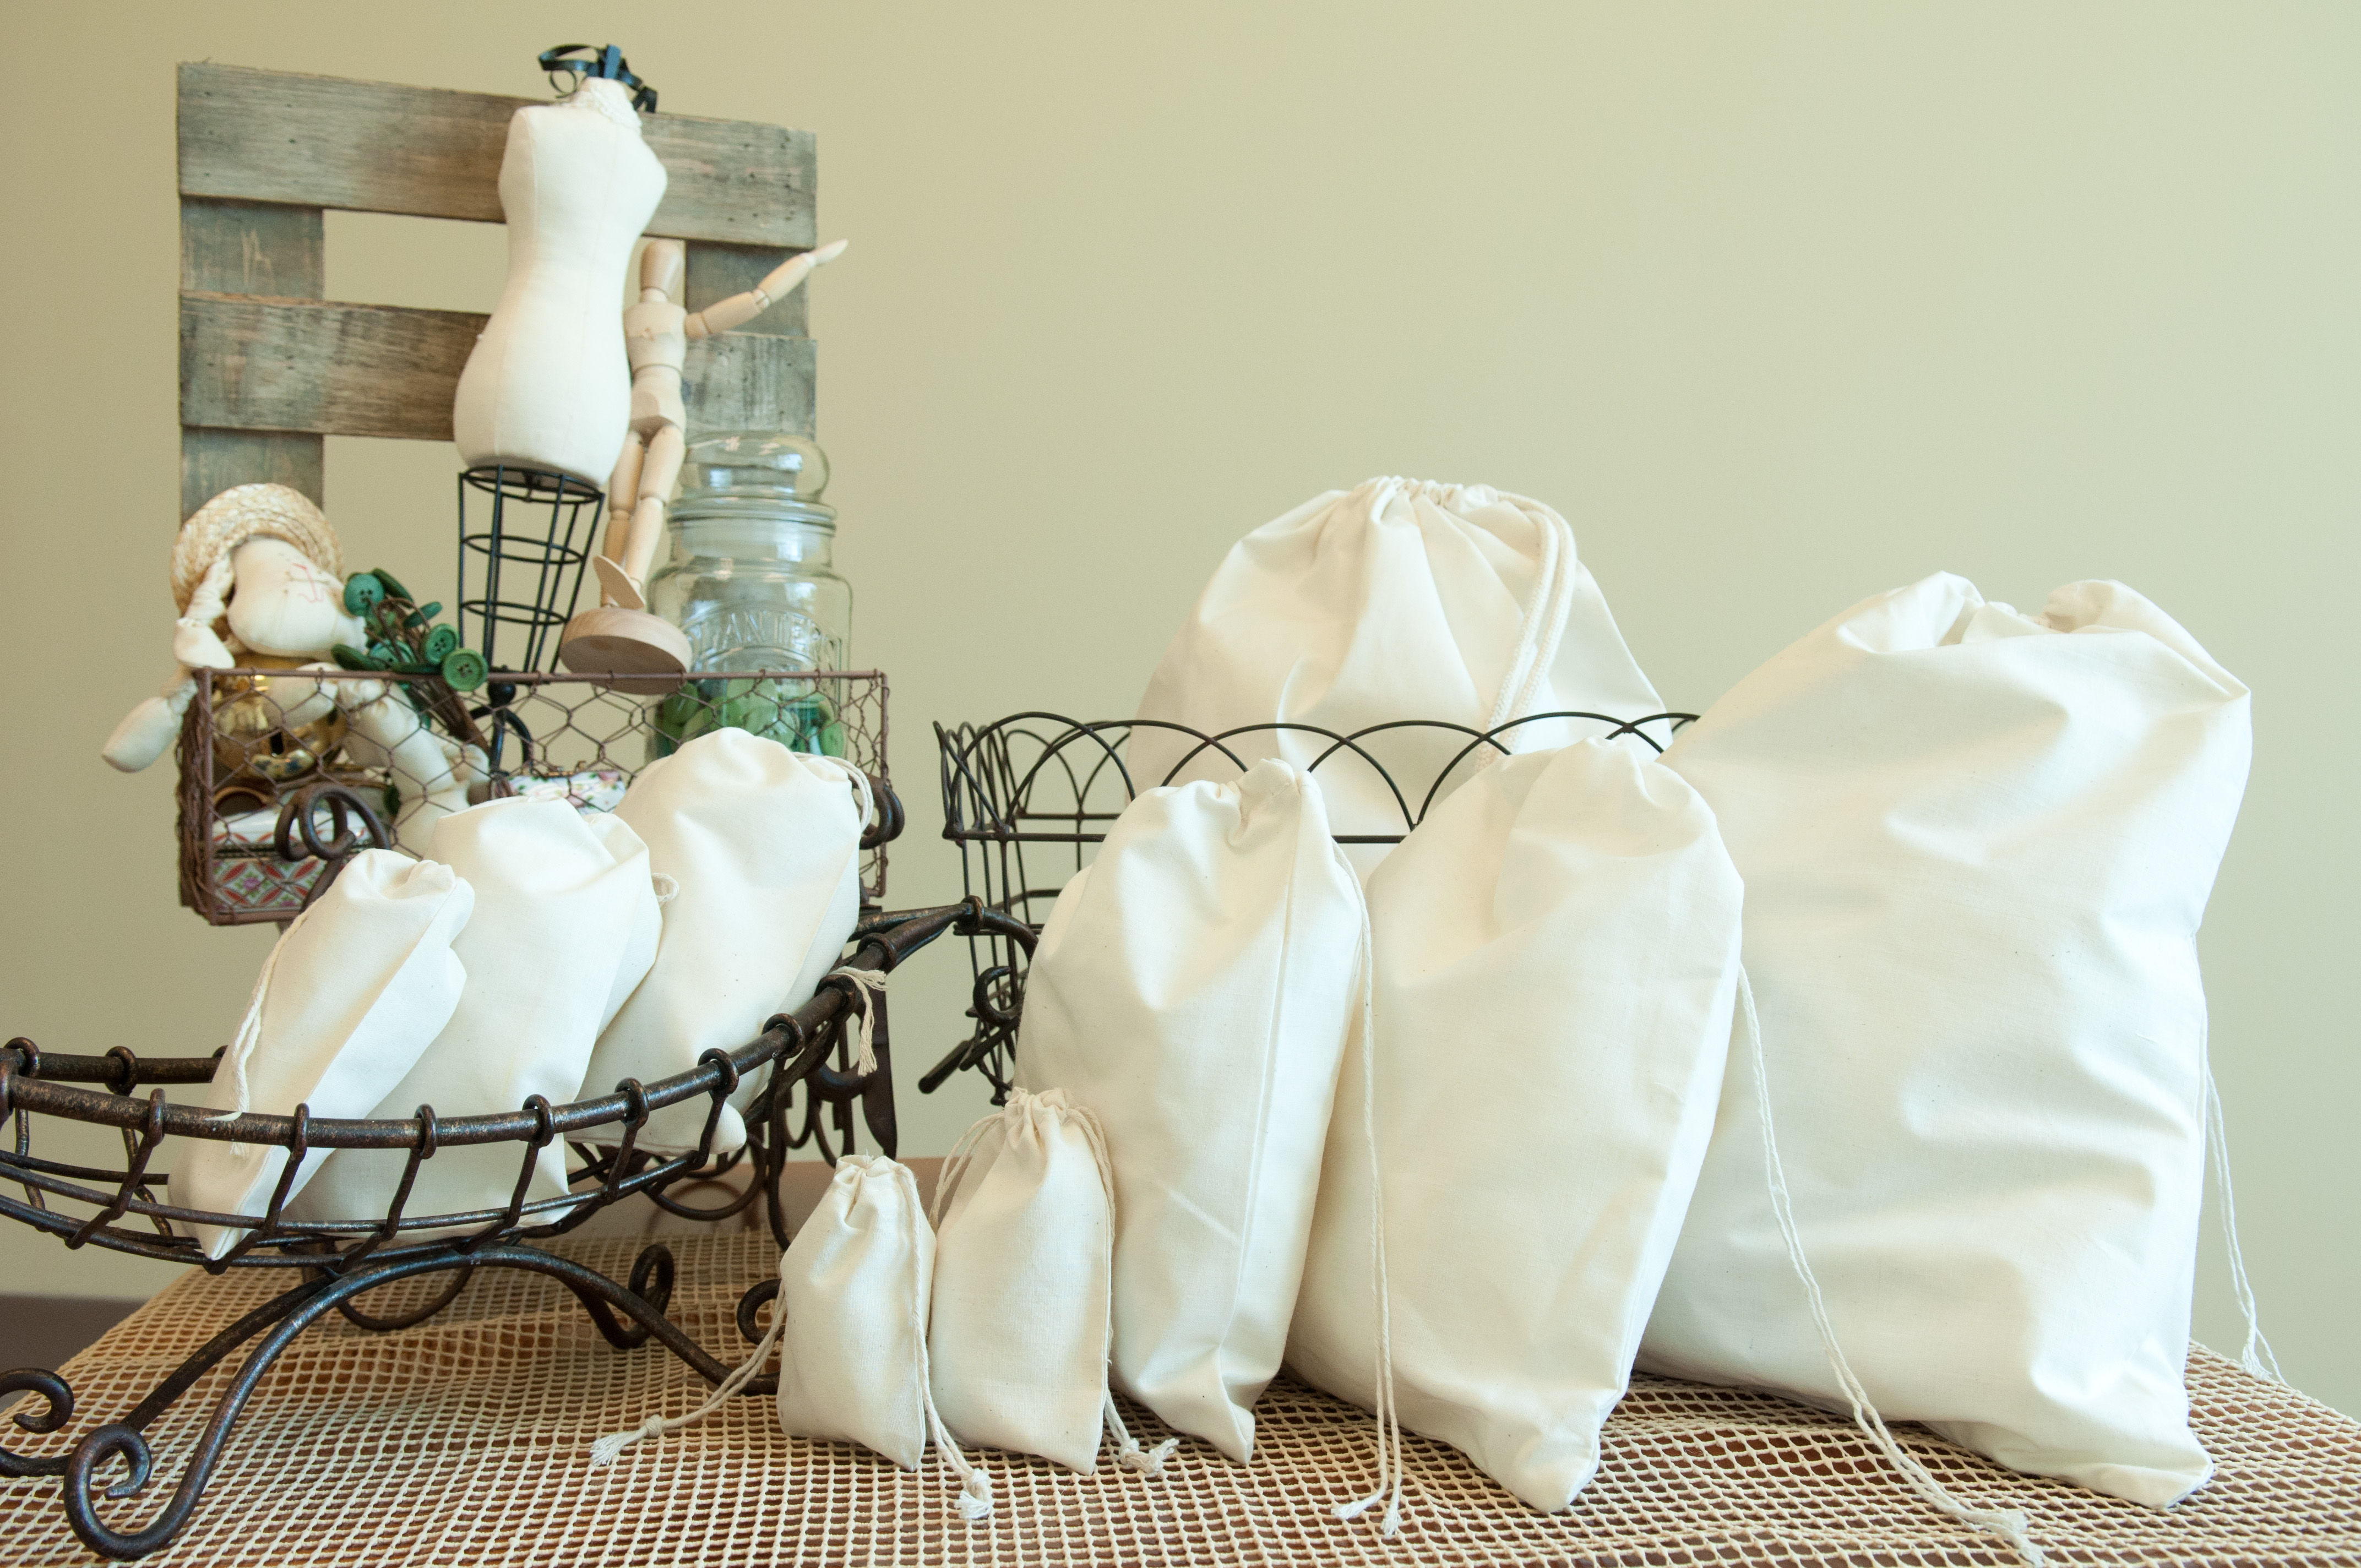 Wholesale Muslin Bags: Customer Review with Sanctuary Church